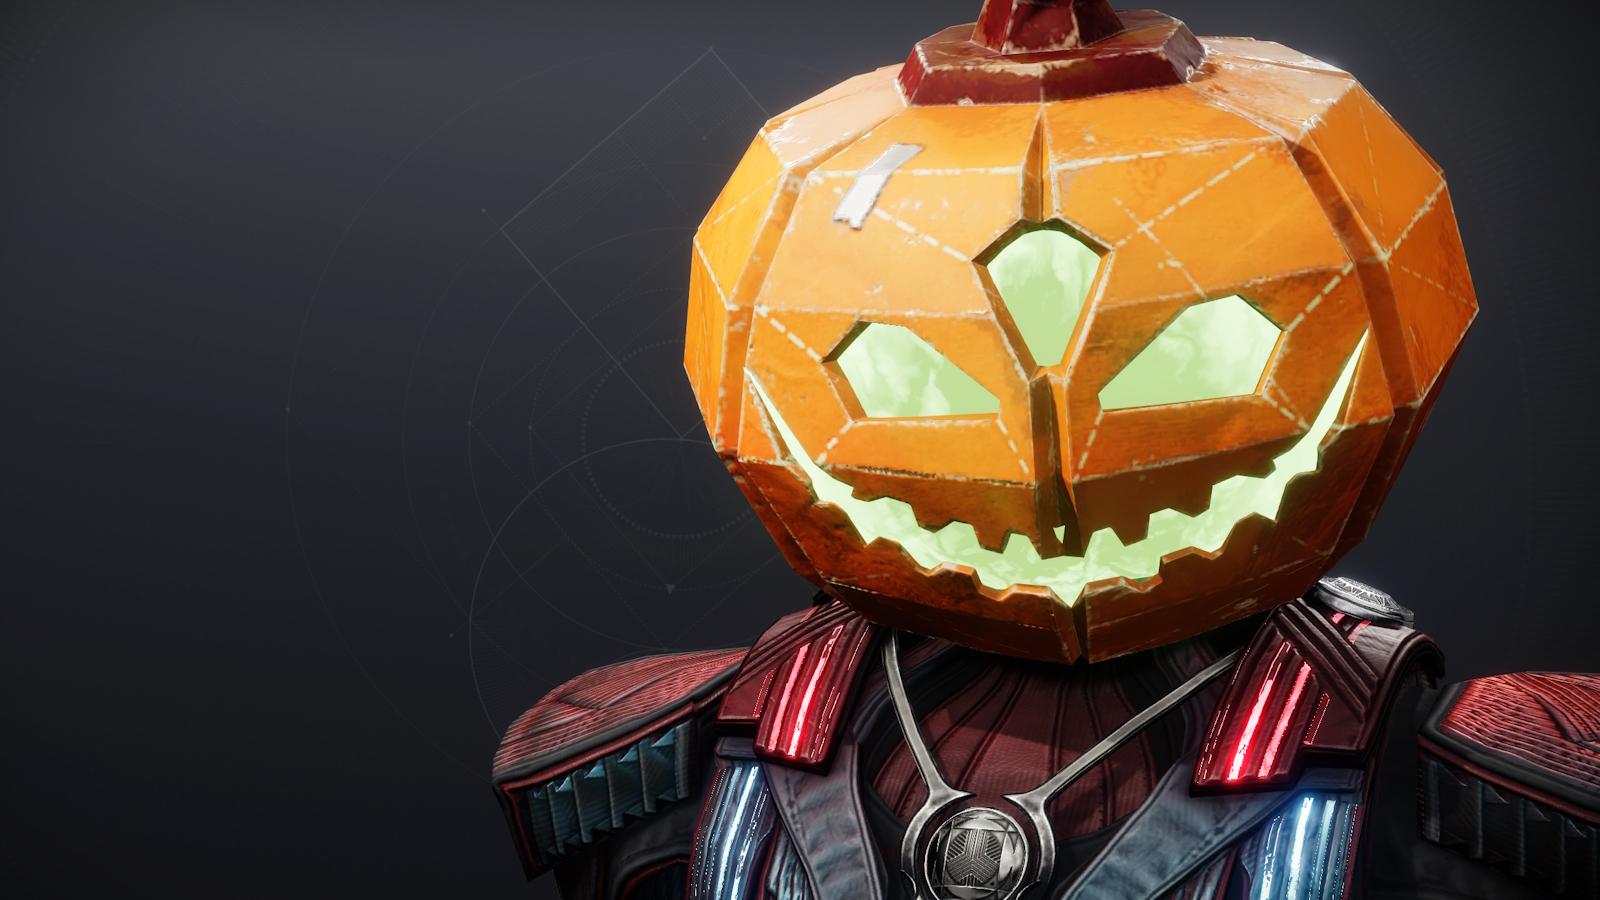 Jack-O'-Lantern mask ornament from Festival of the Lost in Destiny 2.